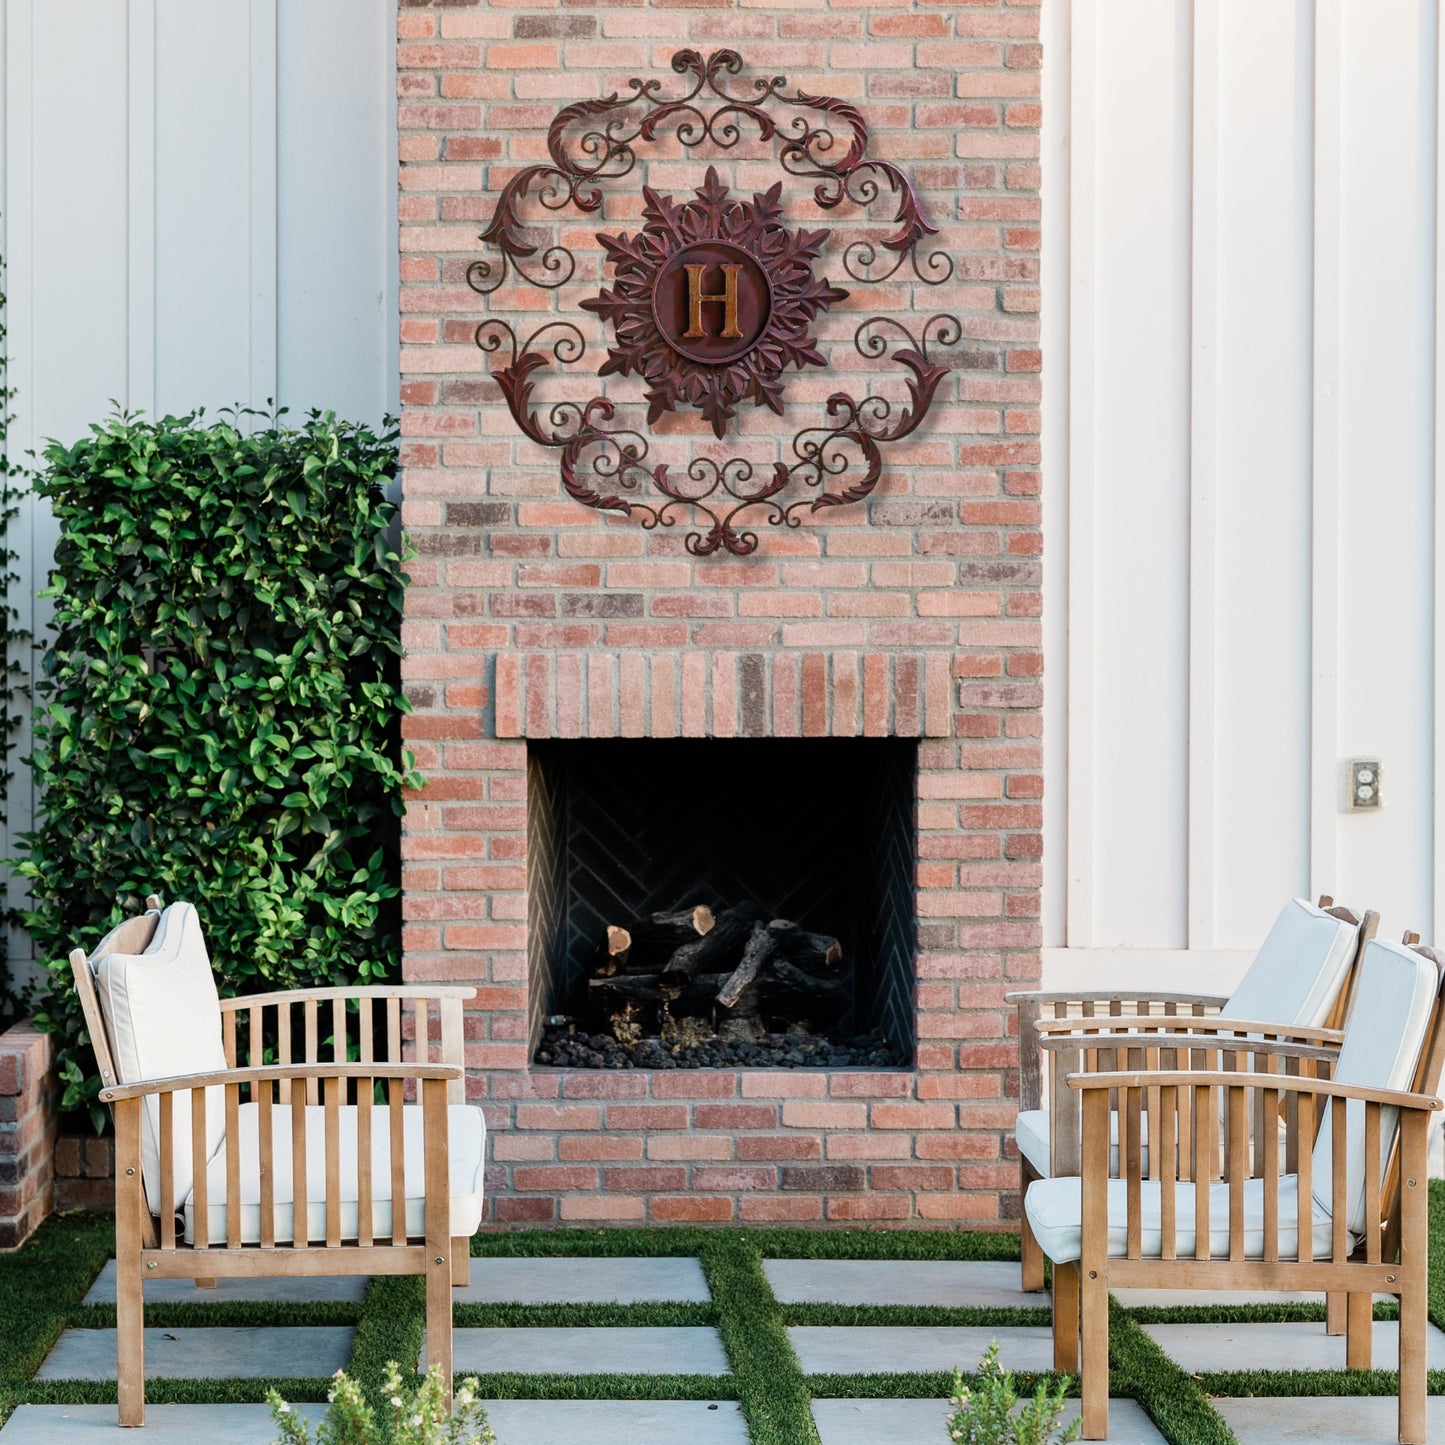 Monogrammed Iron Wall Grille - Monogram Wall Decor | Estate Quality Home Decor | Personalized Wall Decor | Shown with the Monogram "H" | Iron finished in a rustic brown-gold stain with Italian gold 5" monogram shown on covered patio over outdoor brick fireplace | INSIDE OUT | InsideOutCatalog.com